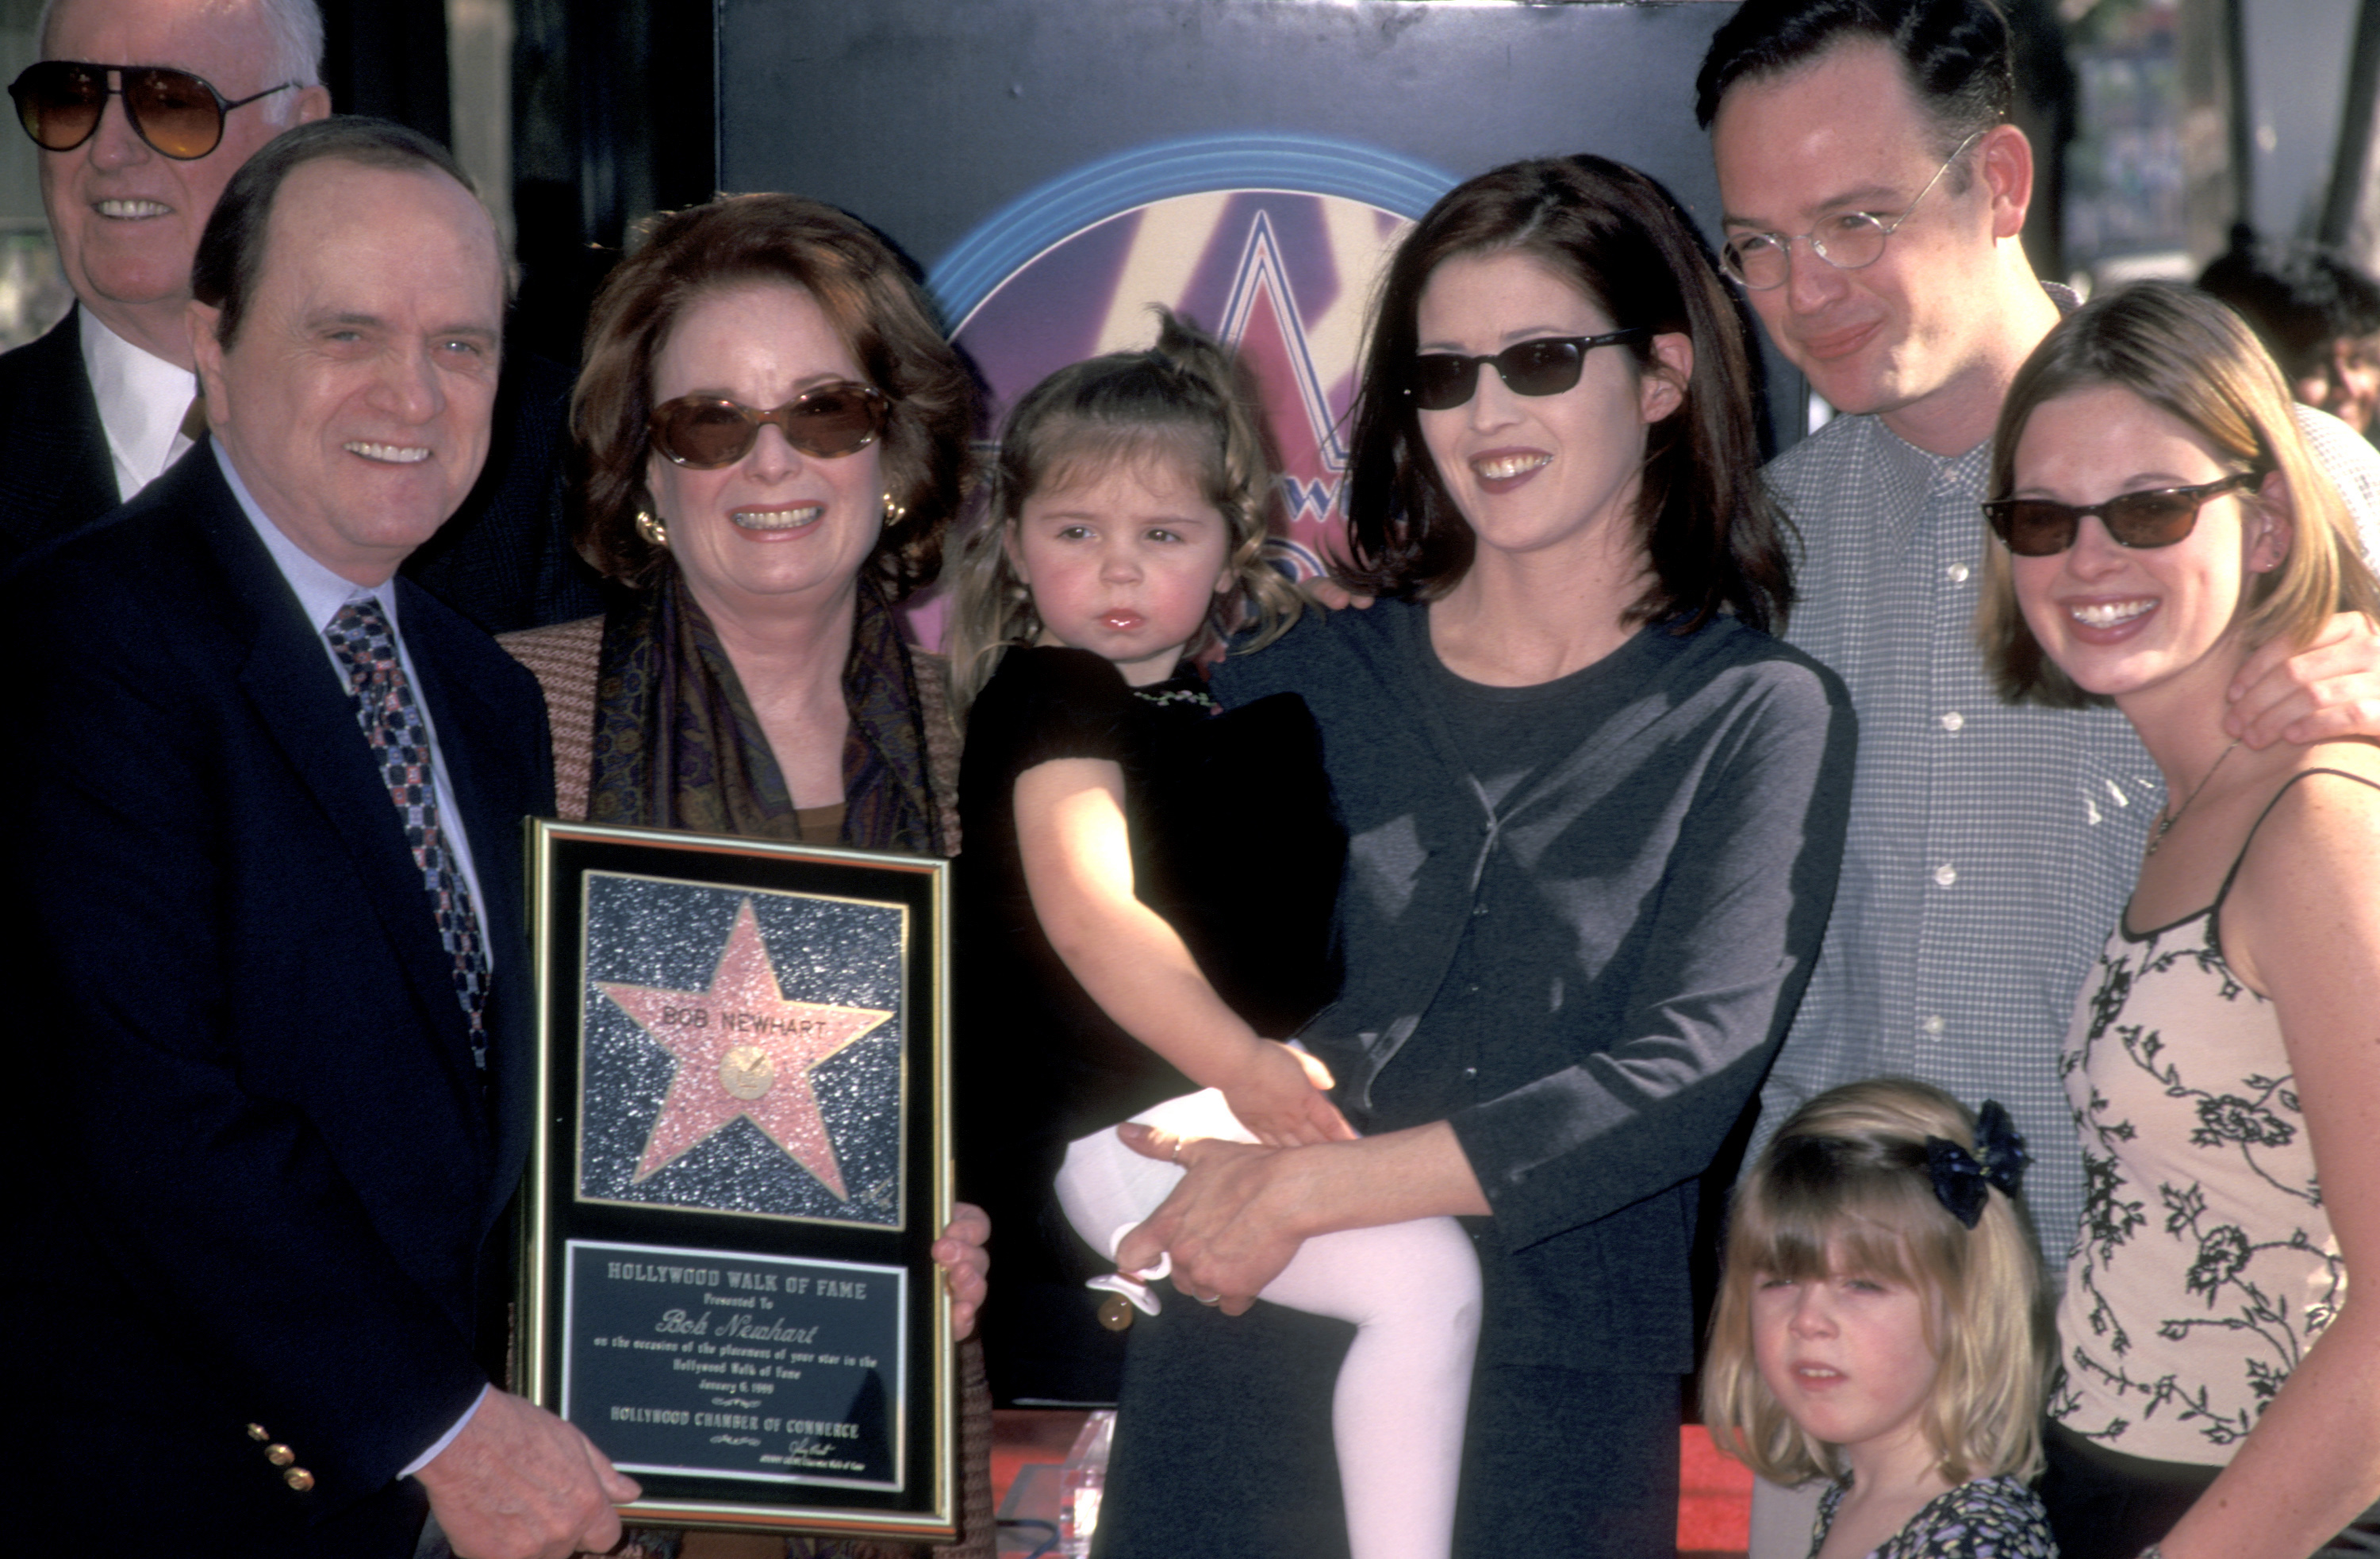 Bob and Ginny Newhart and family when Newhart received a star on the Hollywood Walk of Fame in 1999 | Source: Getty Images